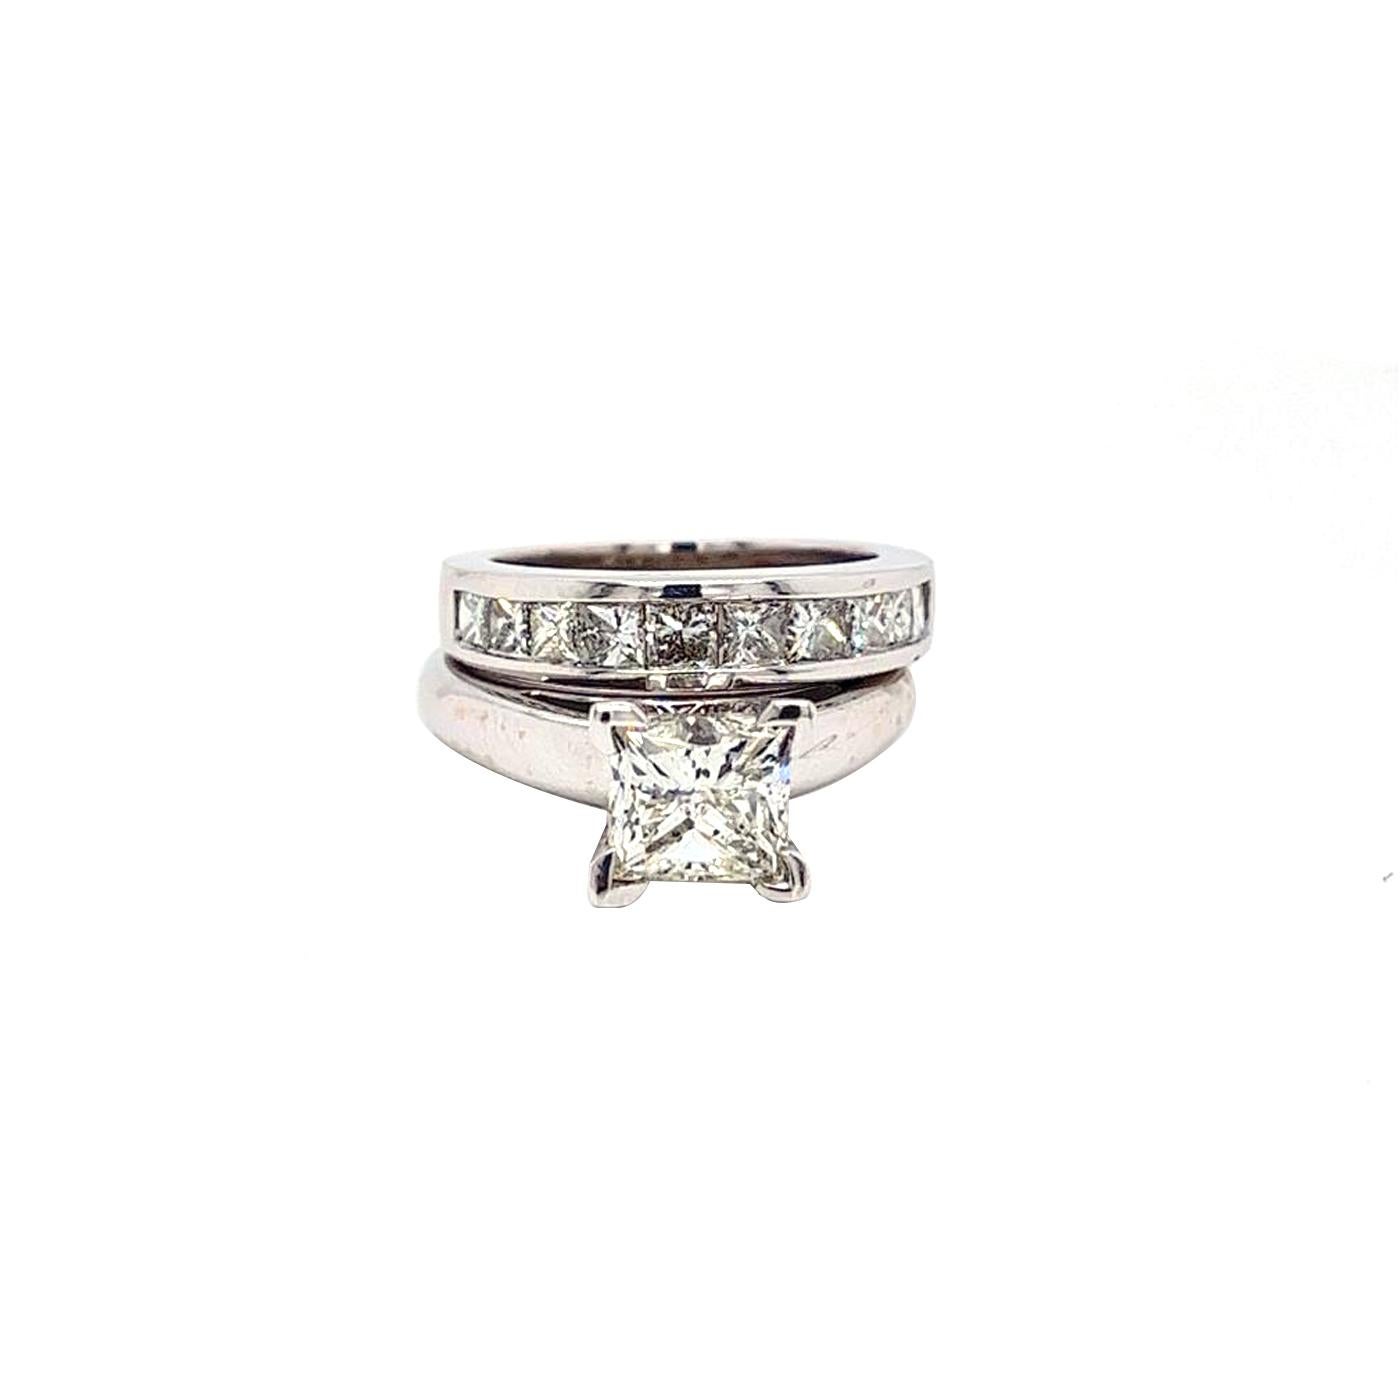 This Uniquely Designed Solitaire Engagement Ring Is Simply Beautiful Features 14 Karat White Gold, The Diamond Is Appraised by Gia Appraiser, It Has 2.03 Ct Princess Cut Diamond of H Color and Si1 Clarity. To Emphasize the Diamond Truly Fire and